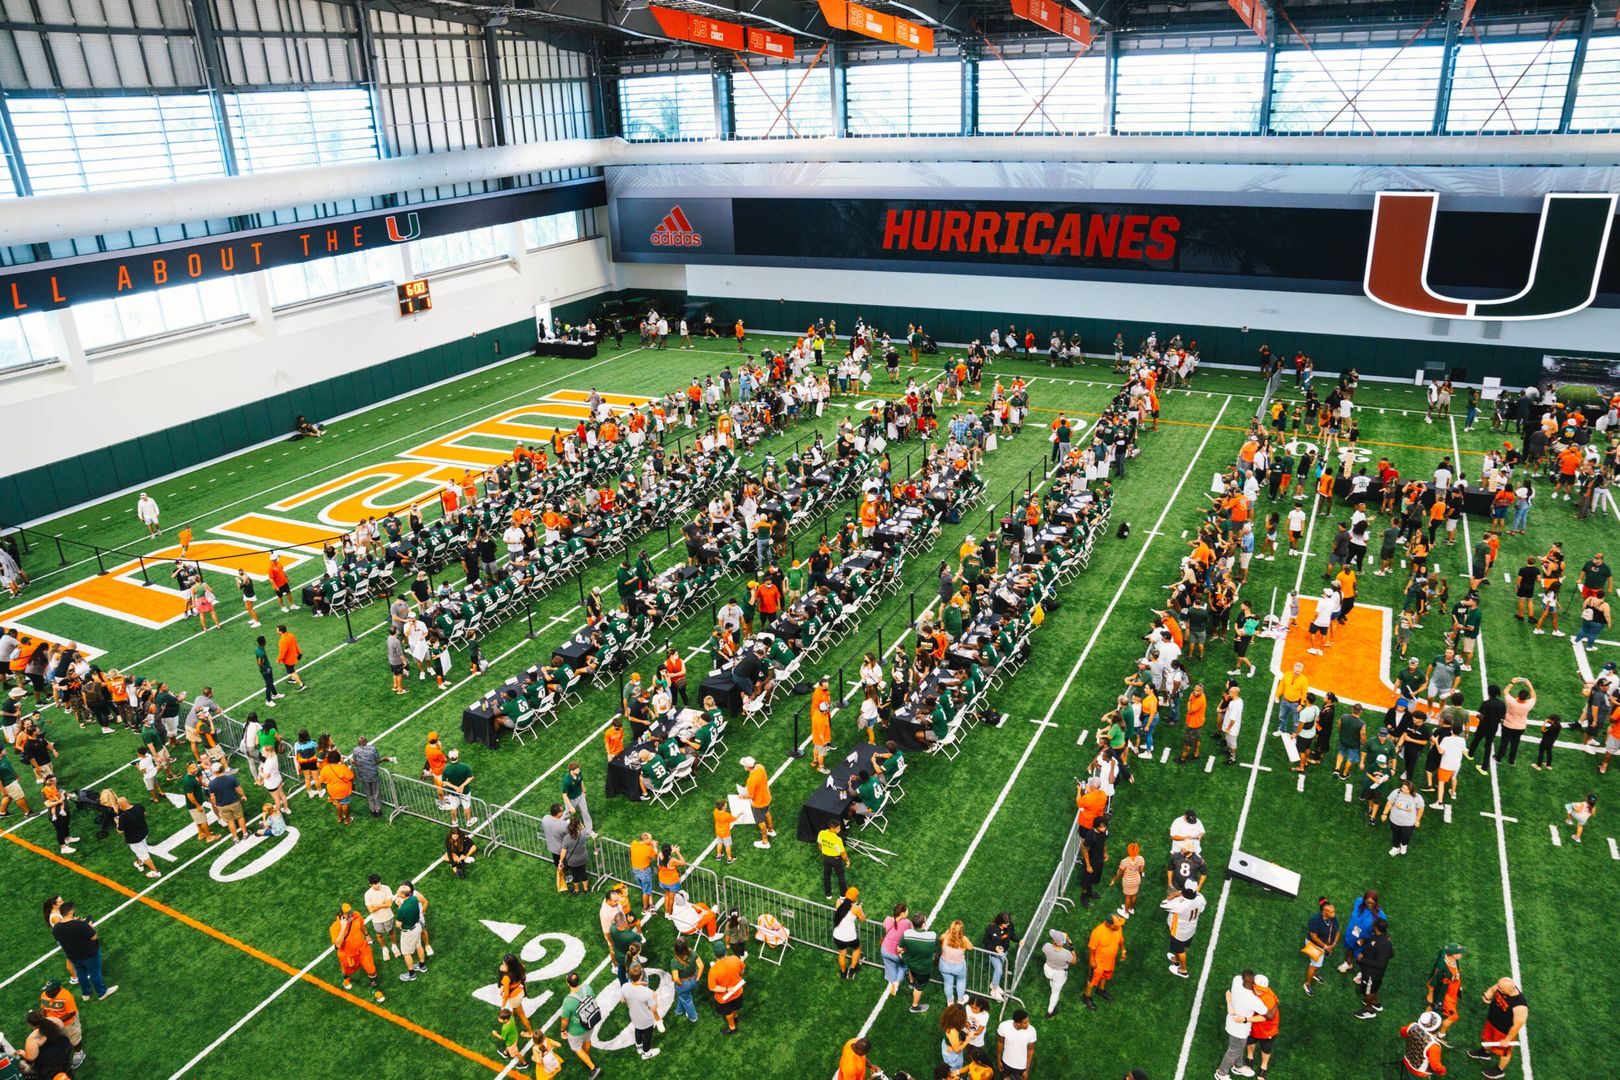 Photo Gallery: CanesFest 2022